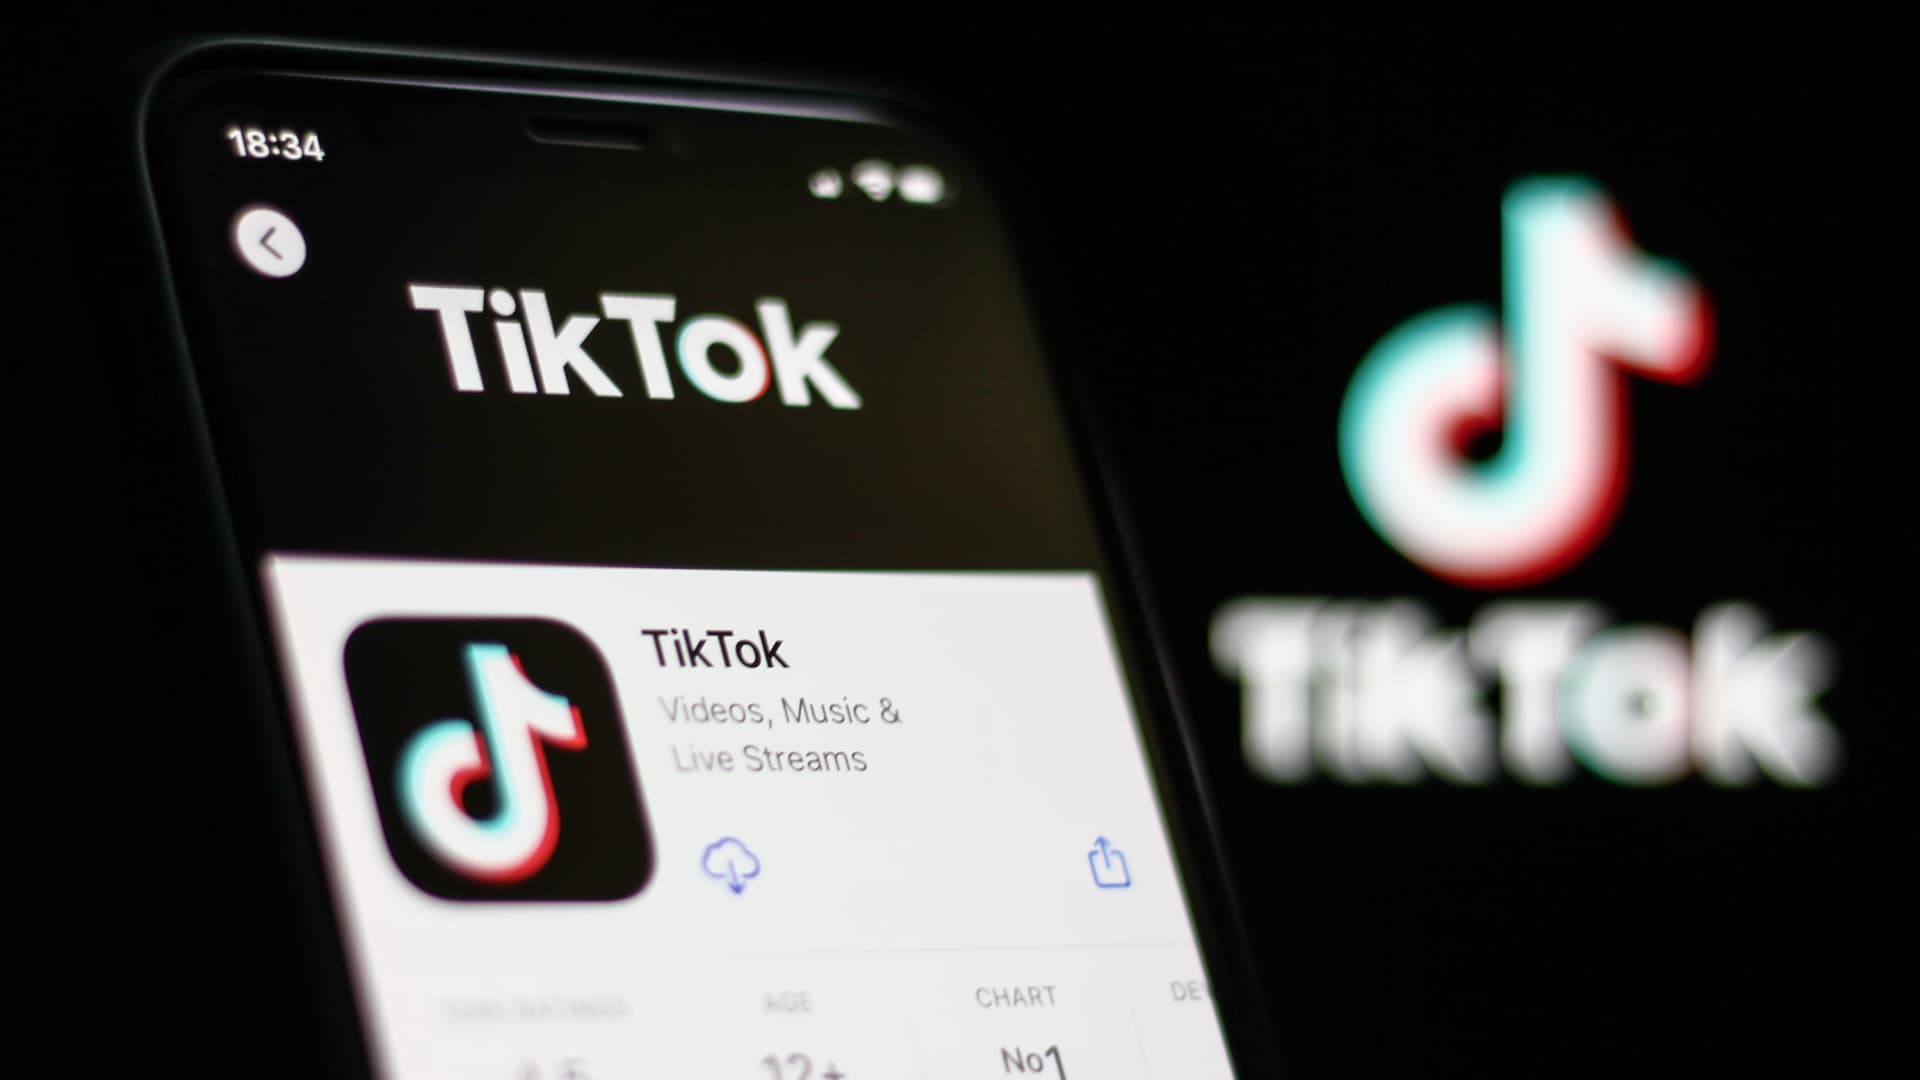 TikTok banned on government devices under spending bill passed by Congress